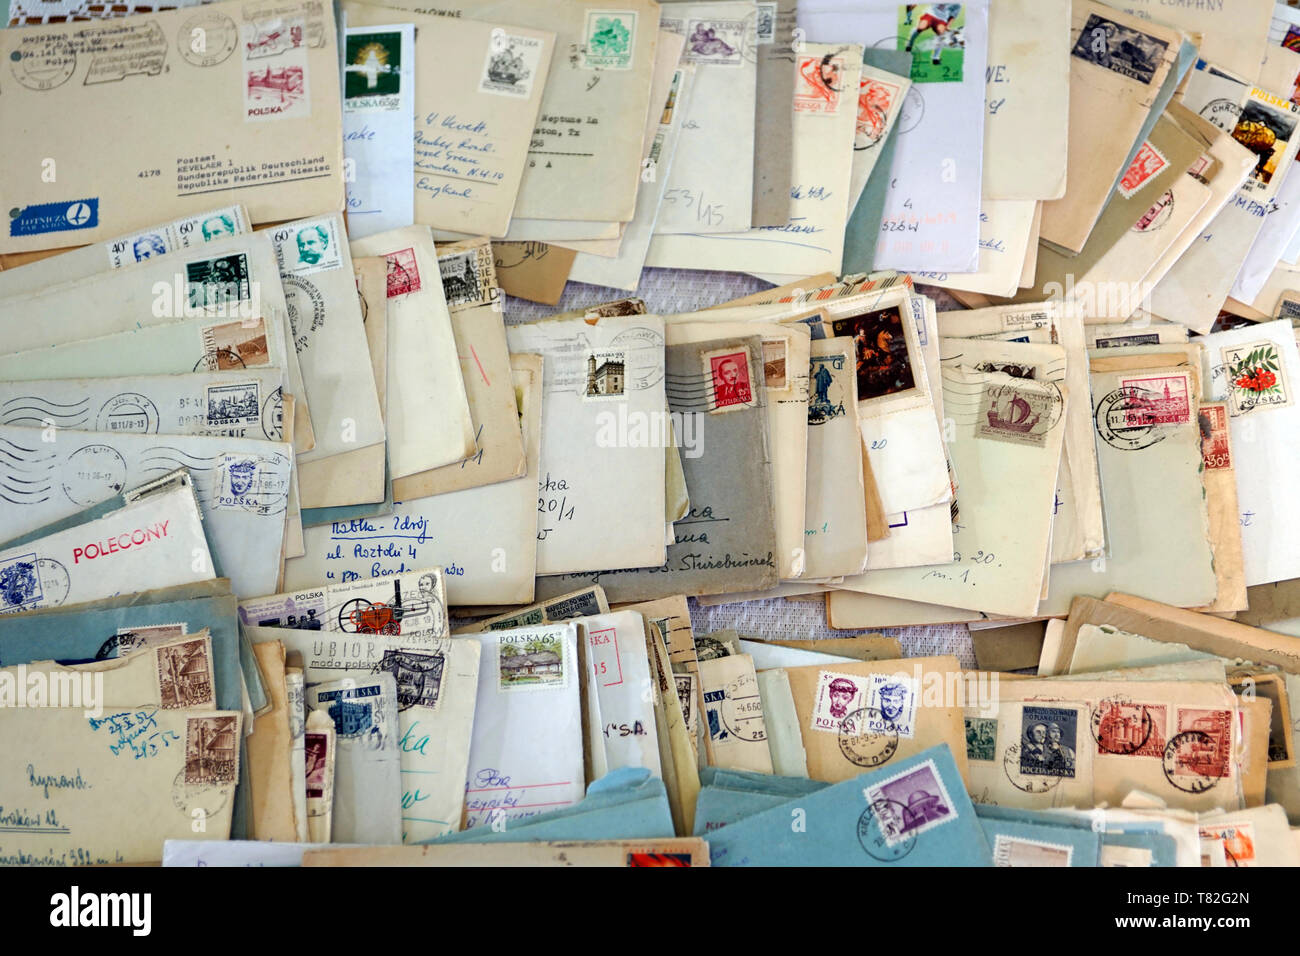 Dozens of old letters in close-up. Old letters lying in a mess. Alte Briefe in Unordnung liegen. Dutzende alter Briefe in Nahaufnahme. Stare listy. Stock Photo